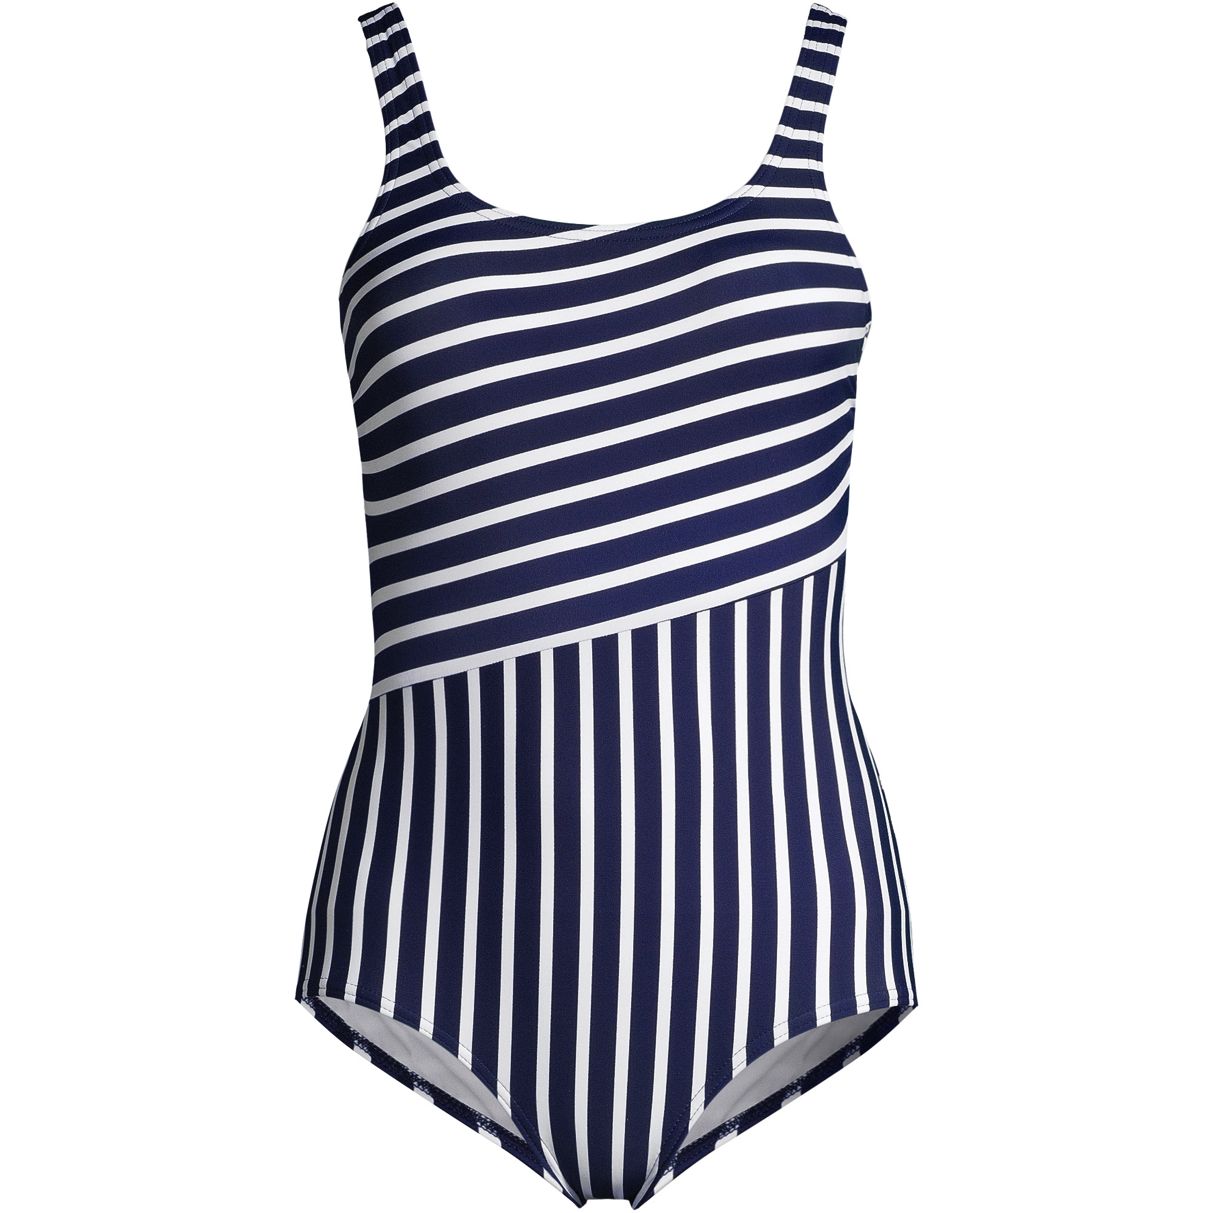 Women's Chlorine Resistant Soft Cup Tugless Sporty One Piece Swimsuit